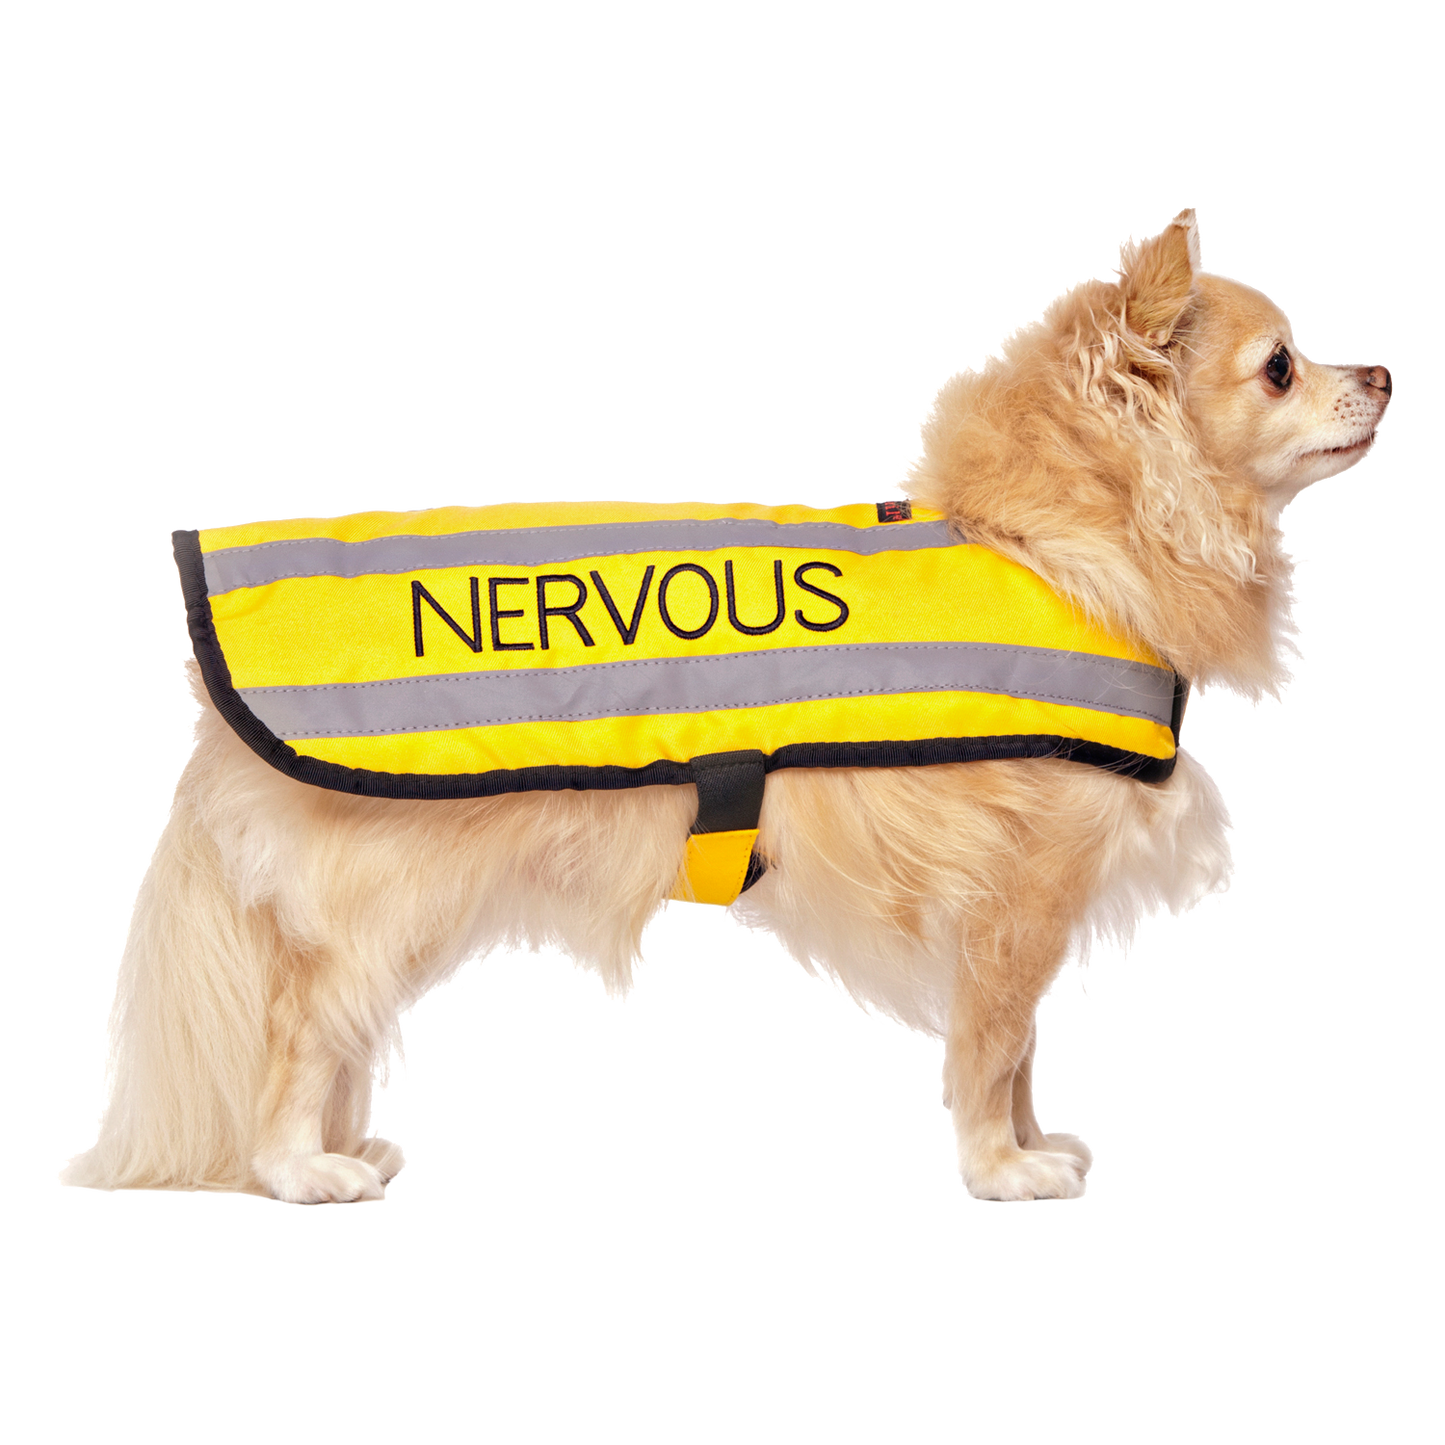 Dexil Friendly Dog Collars yellow NERVOUS Small Reflective Coat 